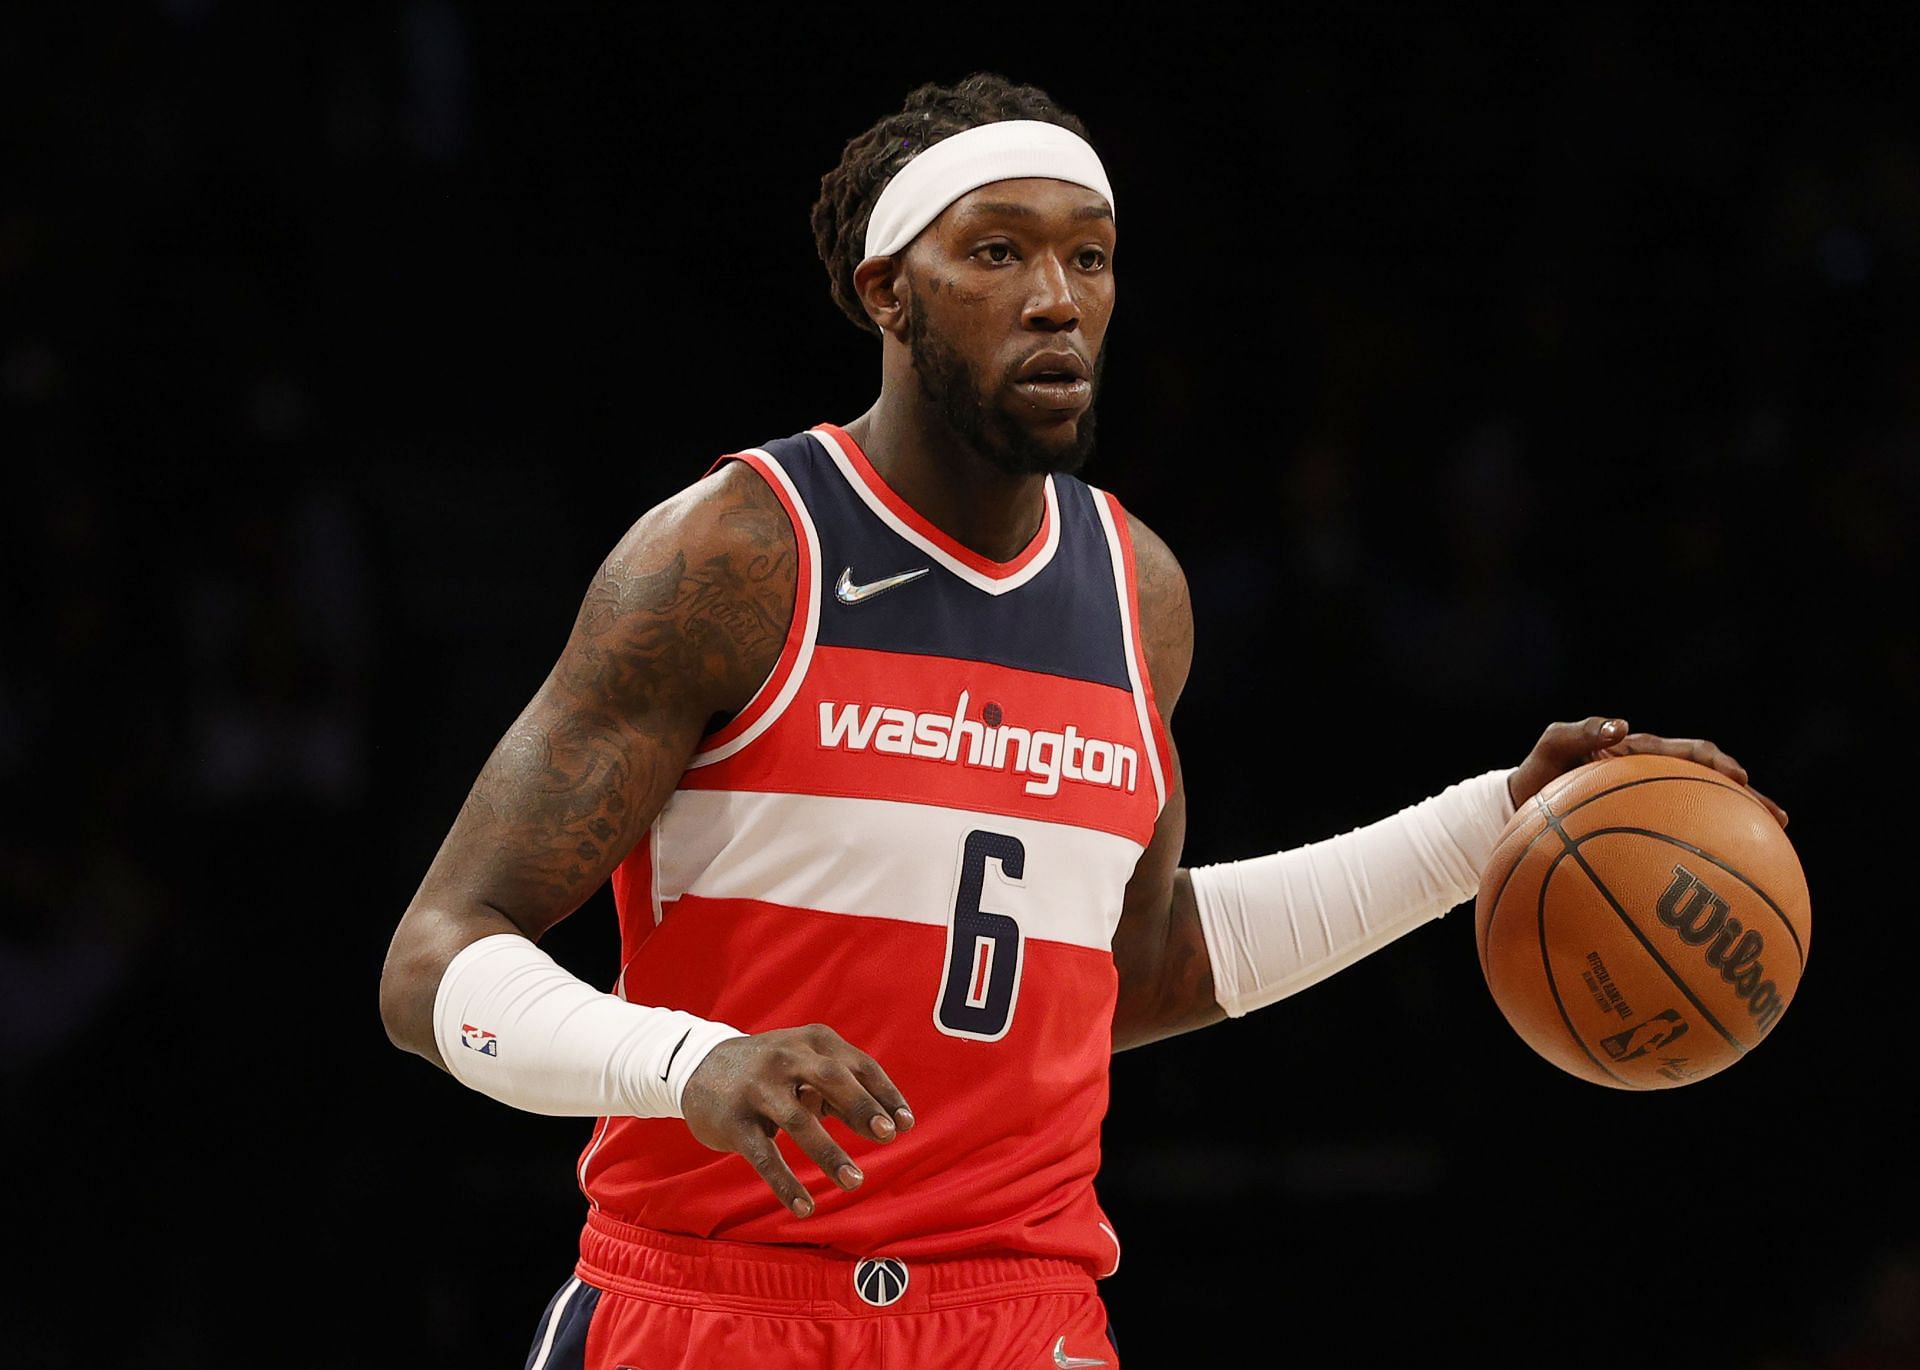 Montrezl Harrell is playing his best basketball with the Washington Wizards